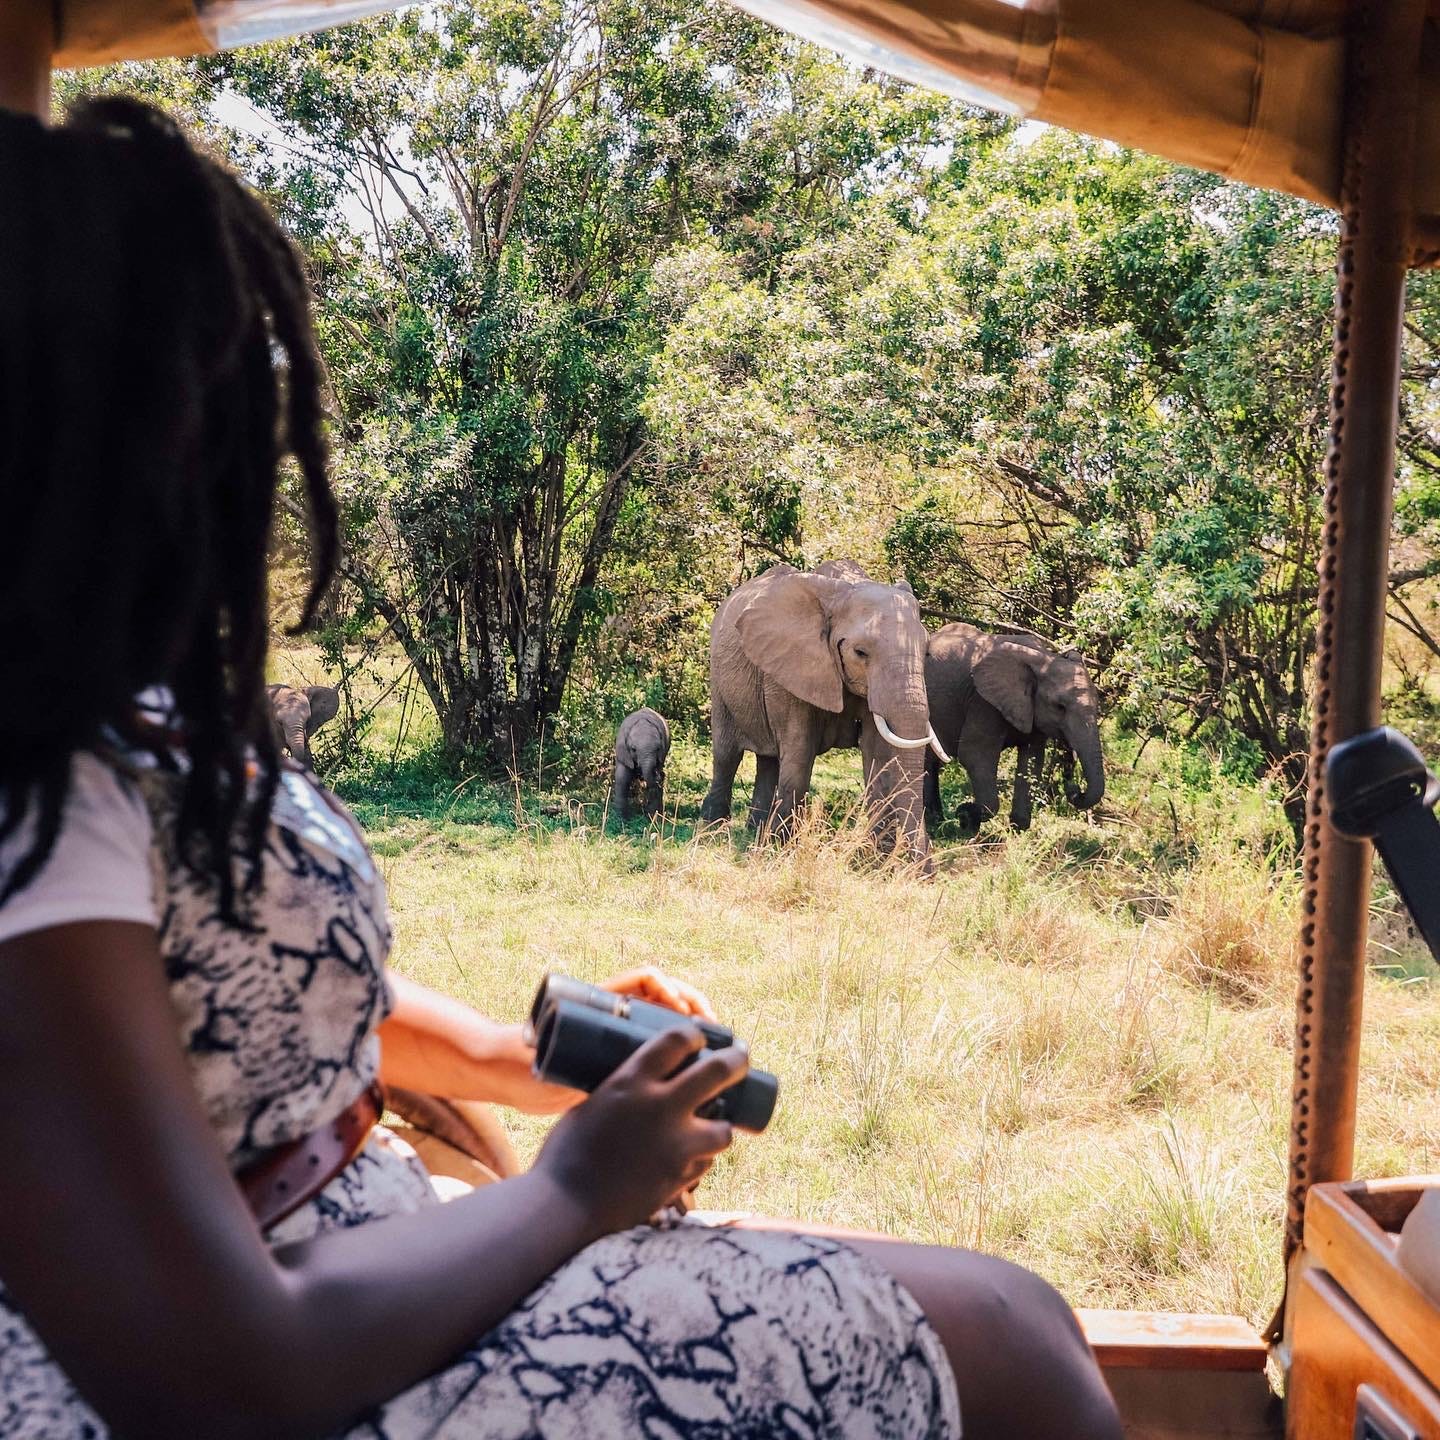 woman holding a pair of binoculars inside a safari vehicle looking out at elephants